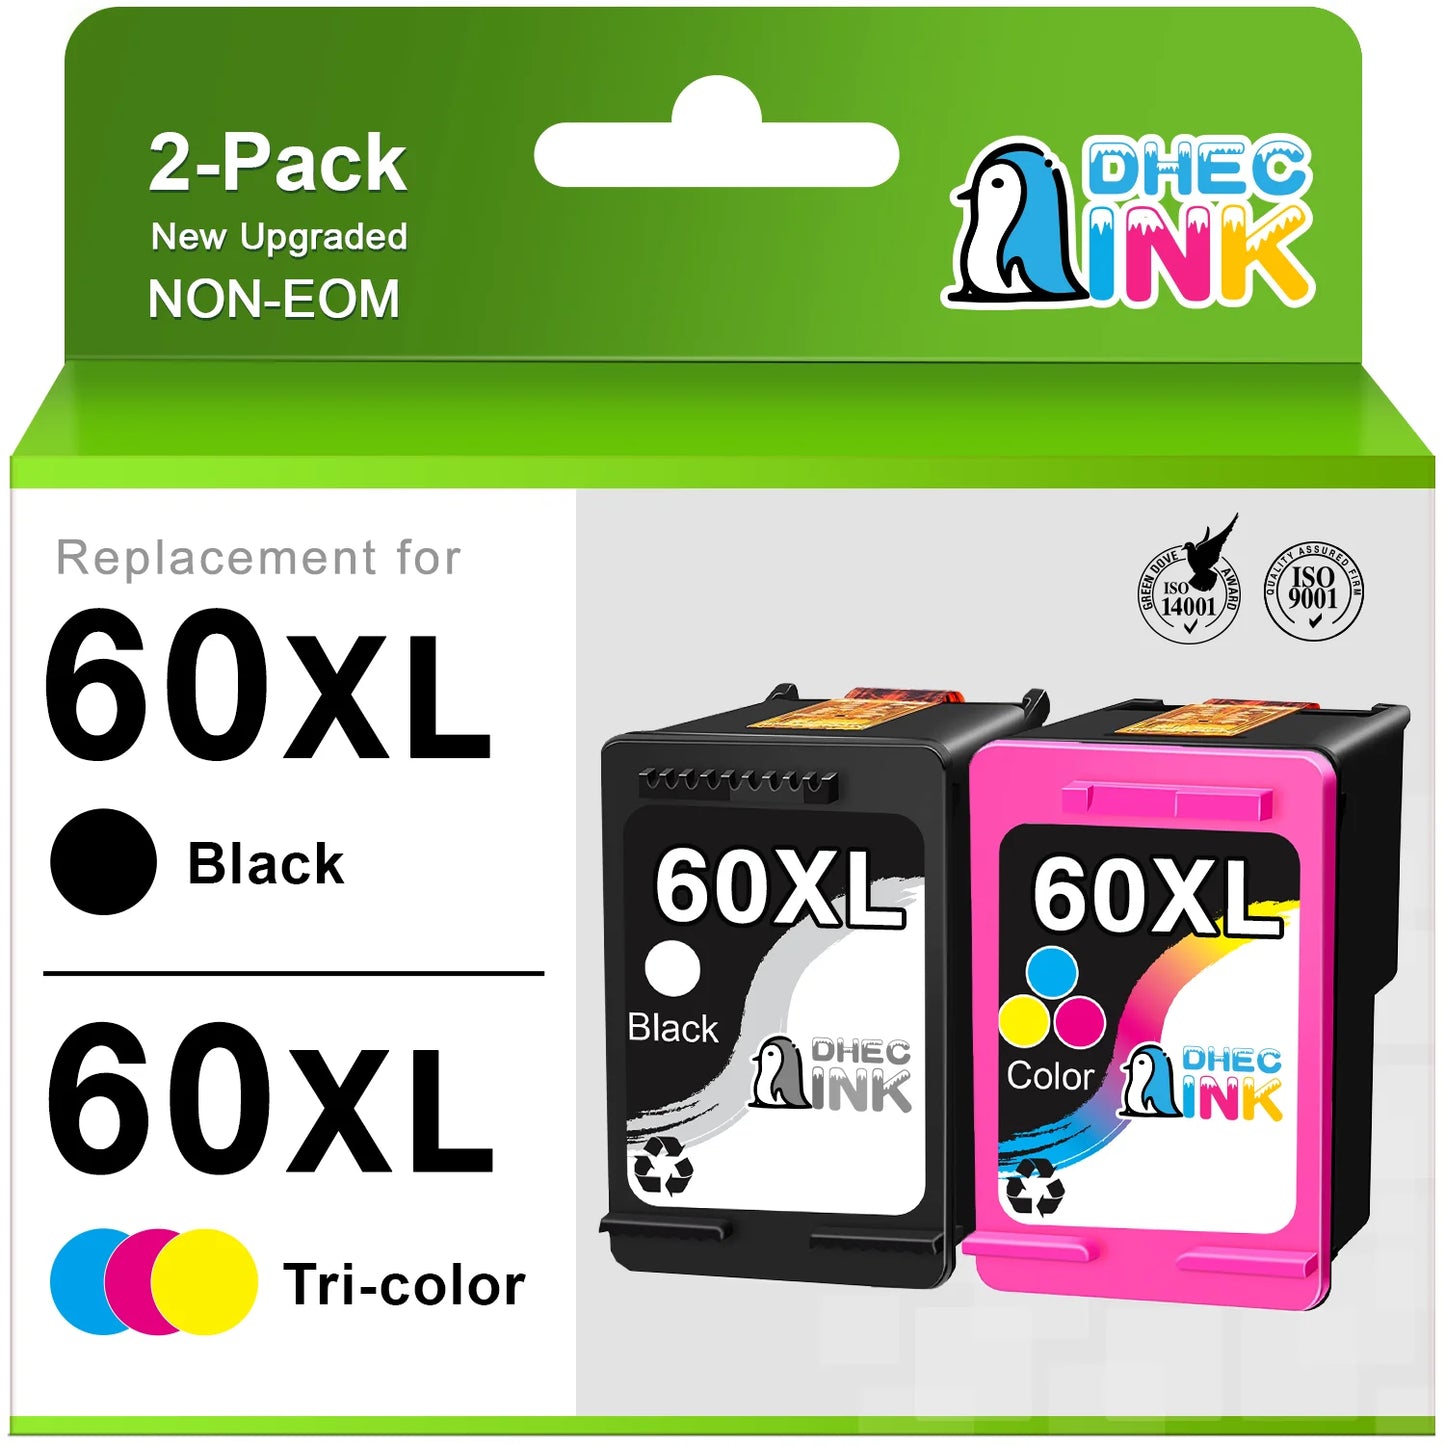 60XL Ink Cartridge for HP Printer Ink 60 XL 60XL Ink Cartridge Combo Pack  CC641WN and CC644WN for HP Envy 100 110 Photosmart c4680 c4780 Deskjet d2680 f2430 ( Black and Tri-Color)